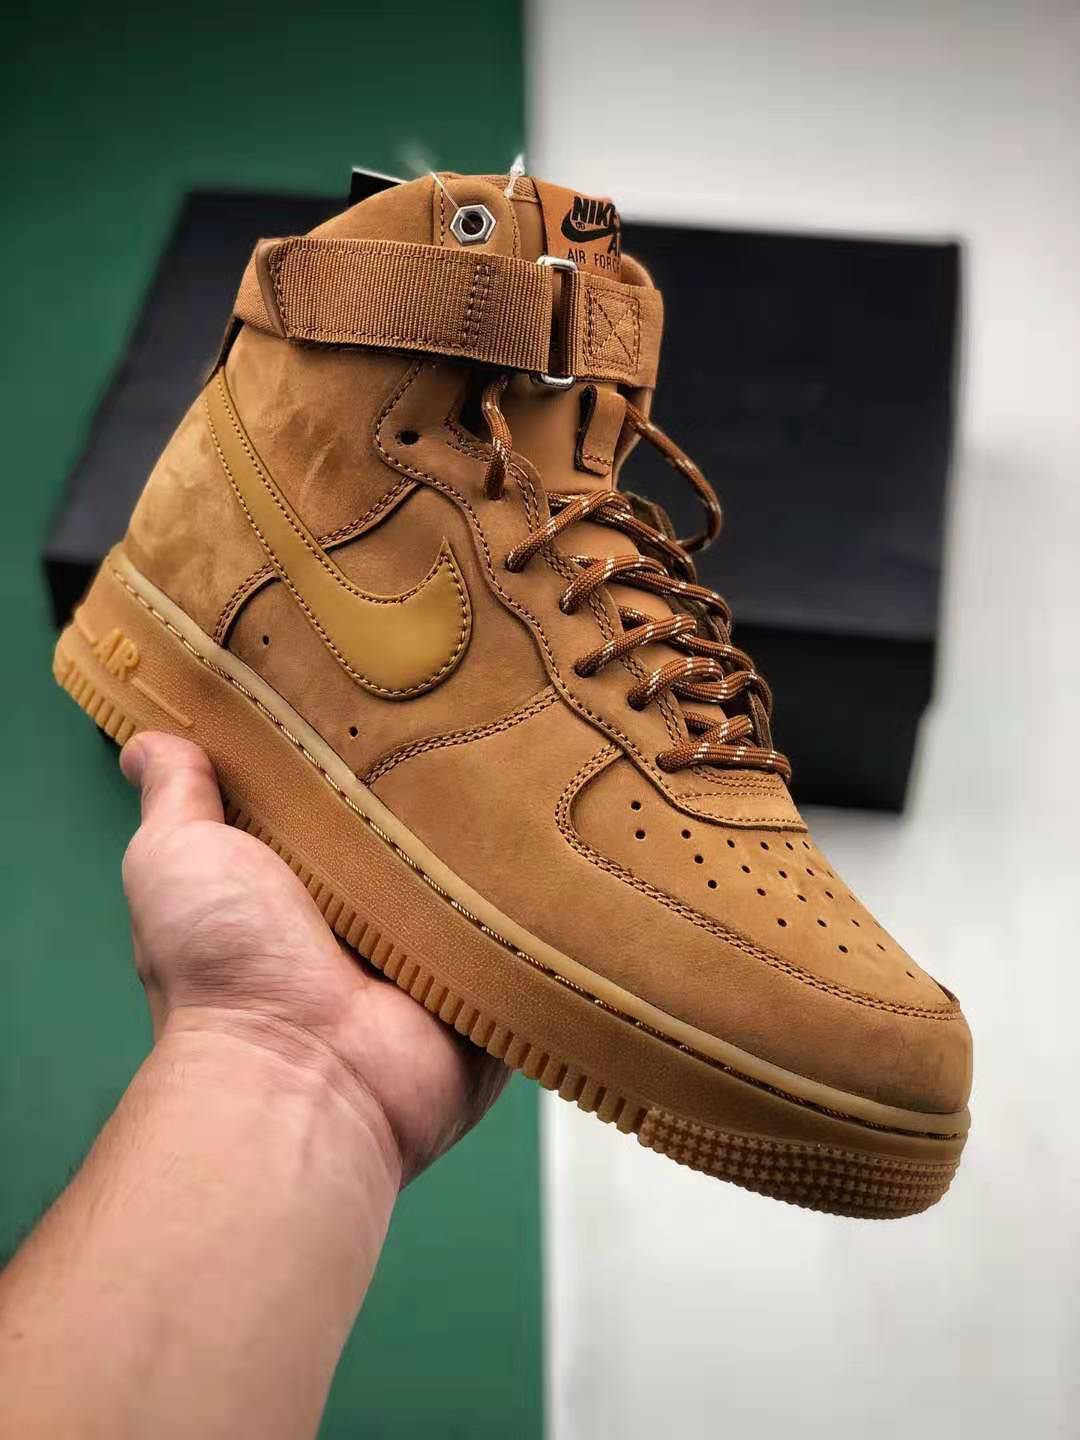 Nike Air Force 1 High Flax CJ9178-200: Premium Sneakers for Style Seekers